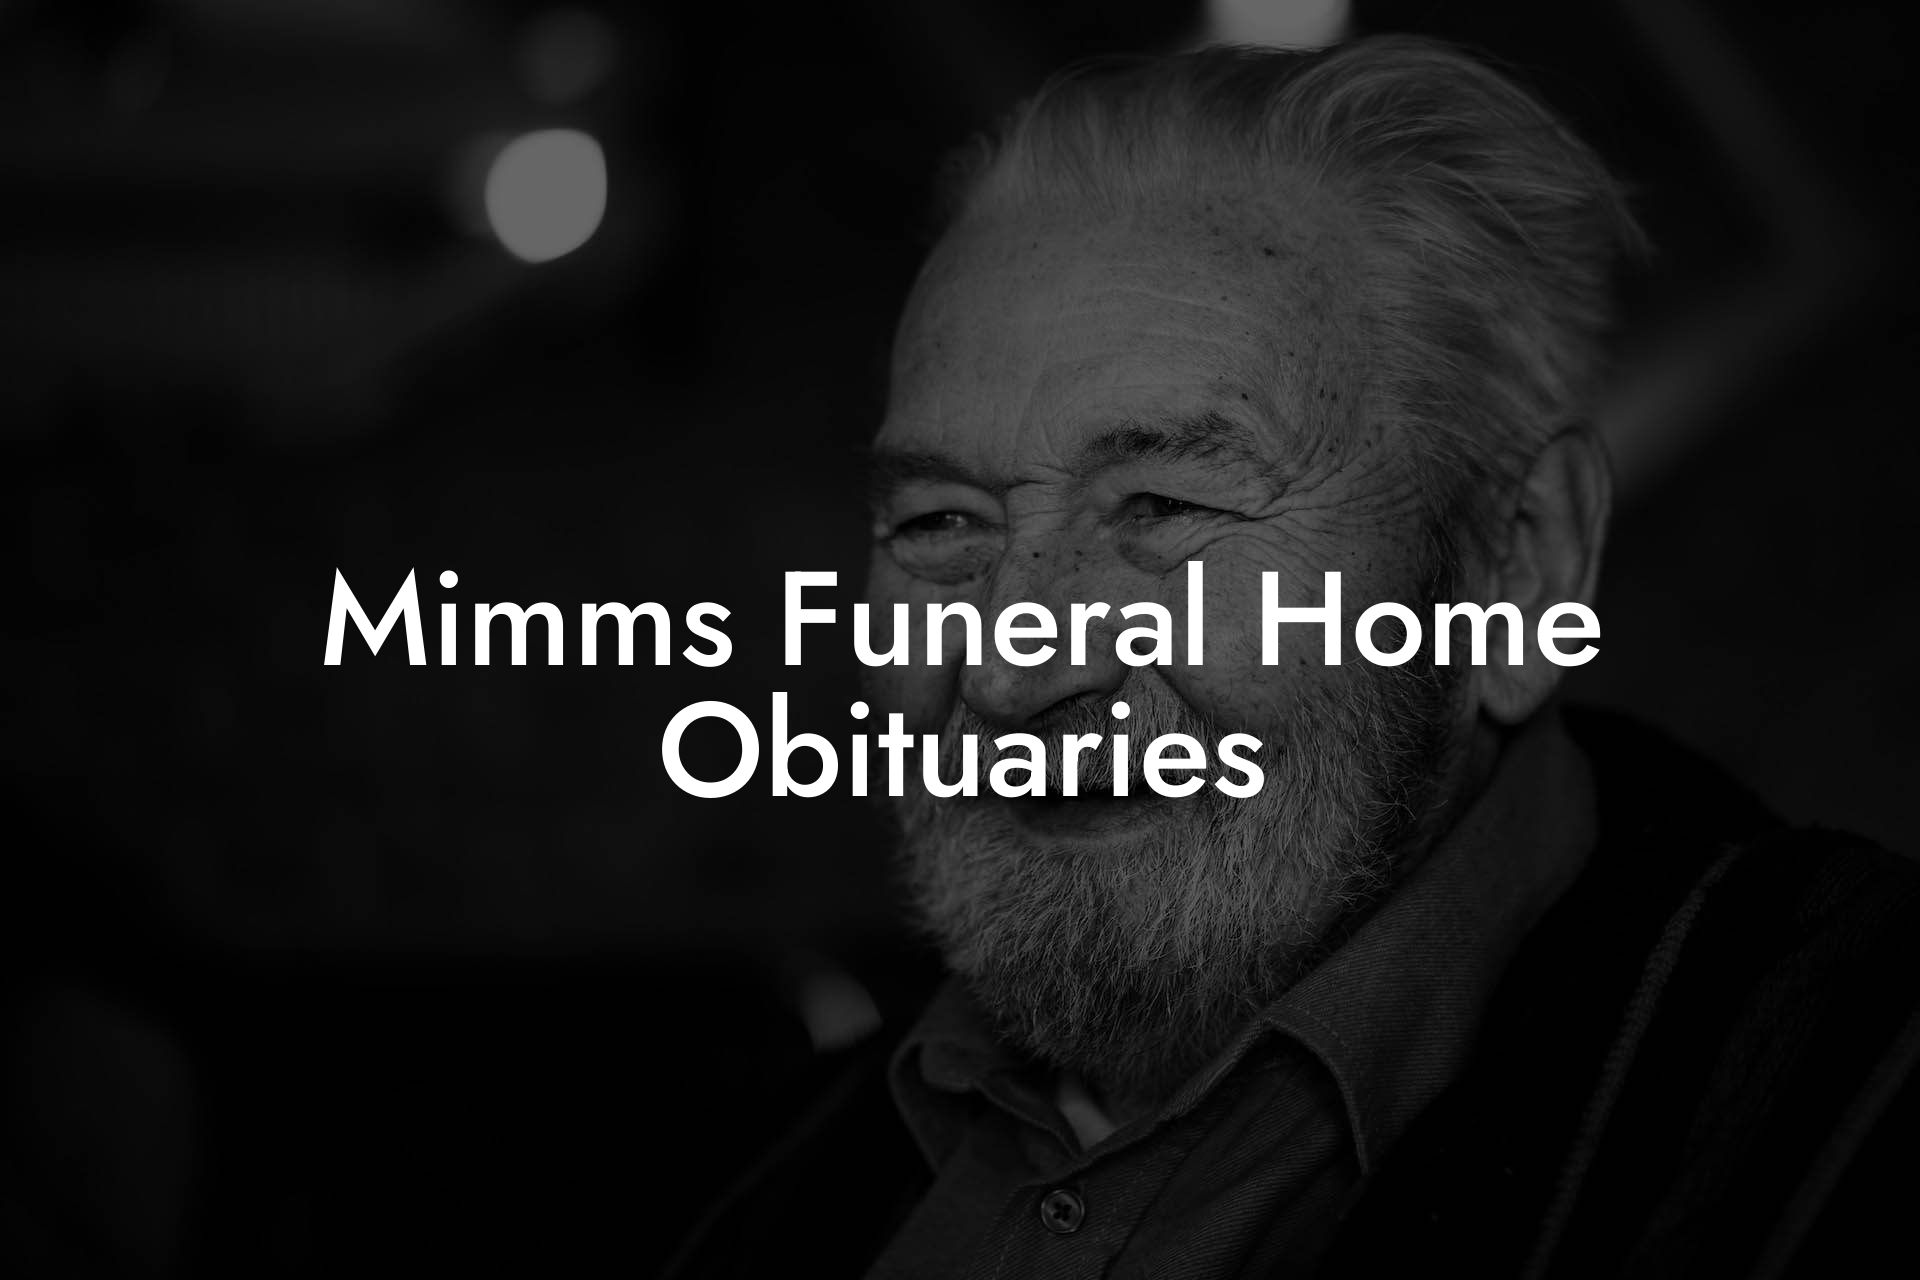 Mimms Funeral Home Obituaries